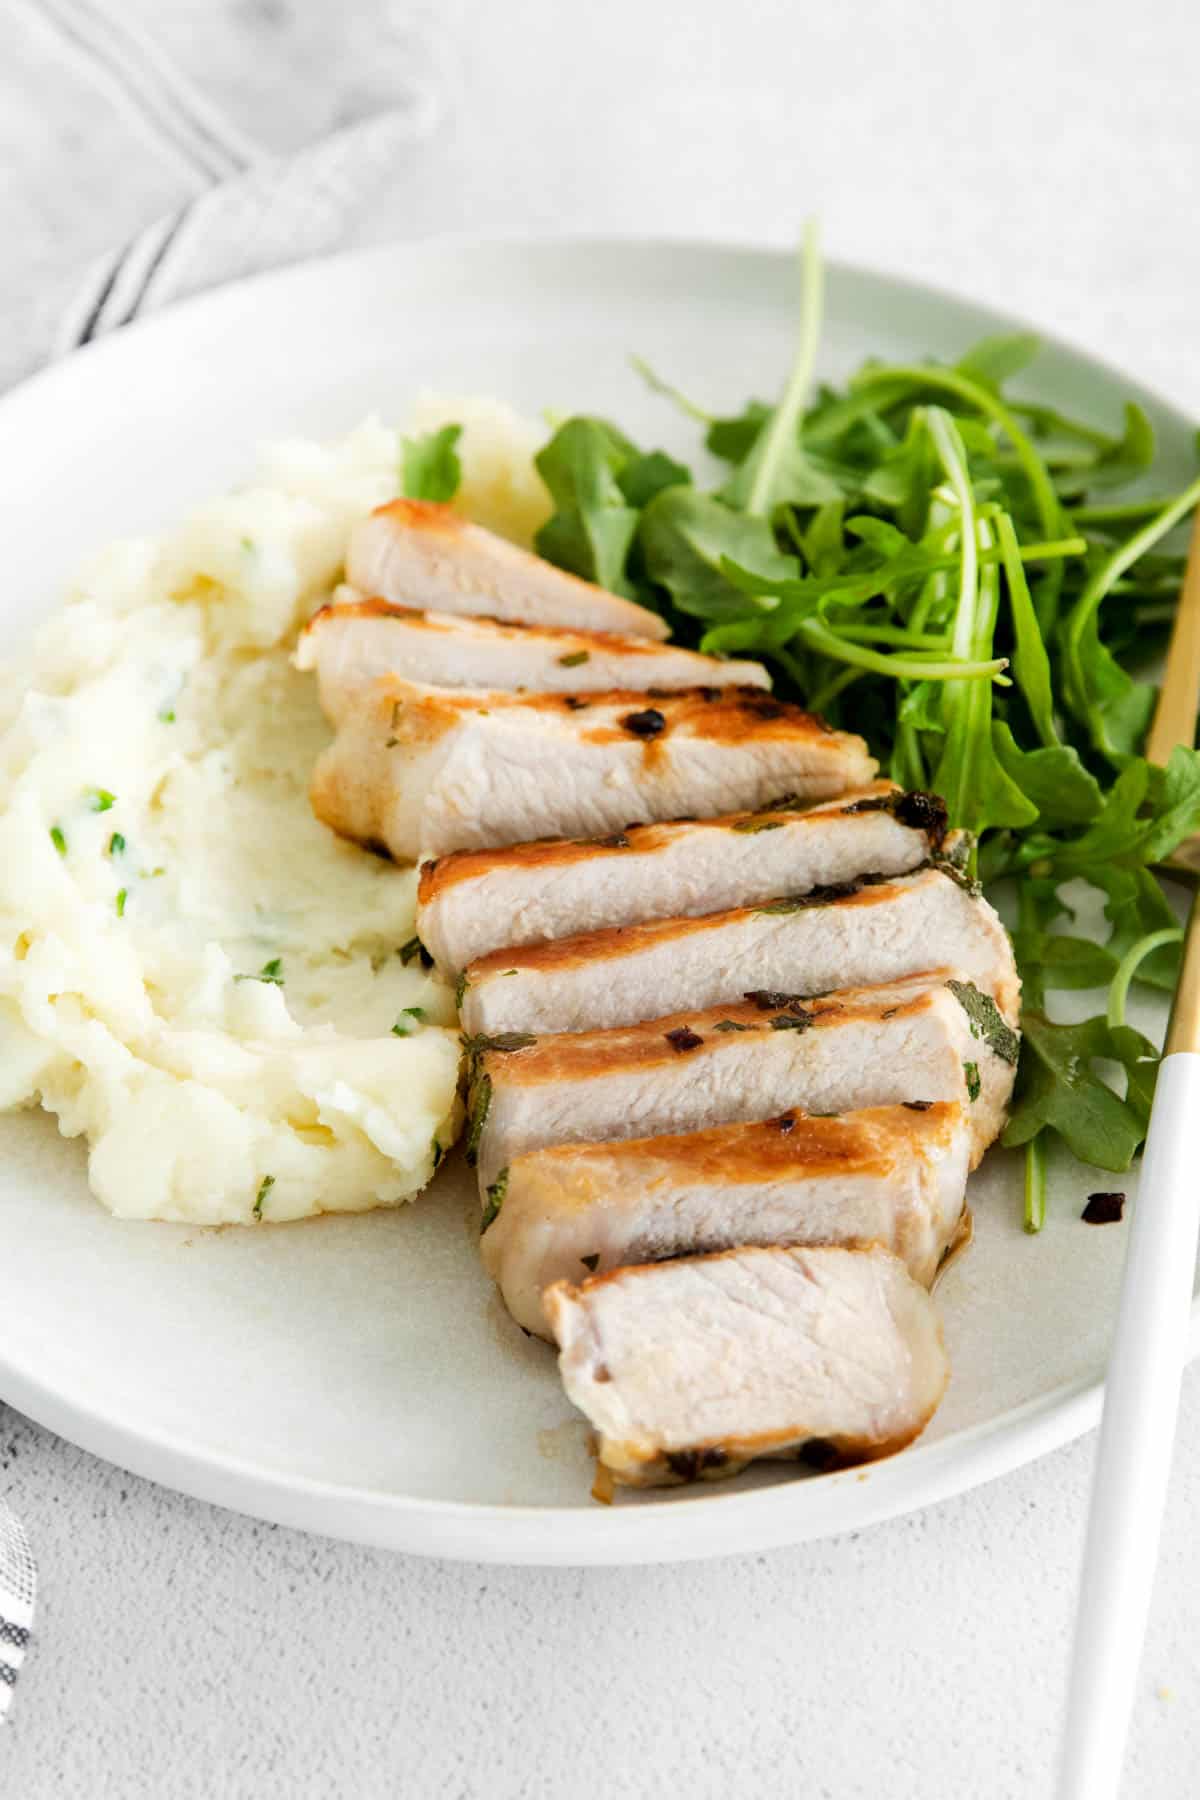 sliced bonless pork chop on a plate with arugula and mashed potatoes